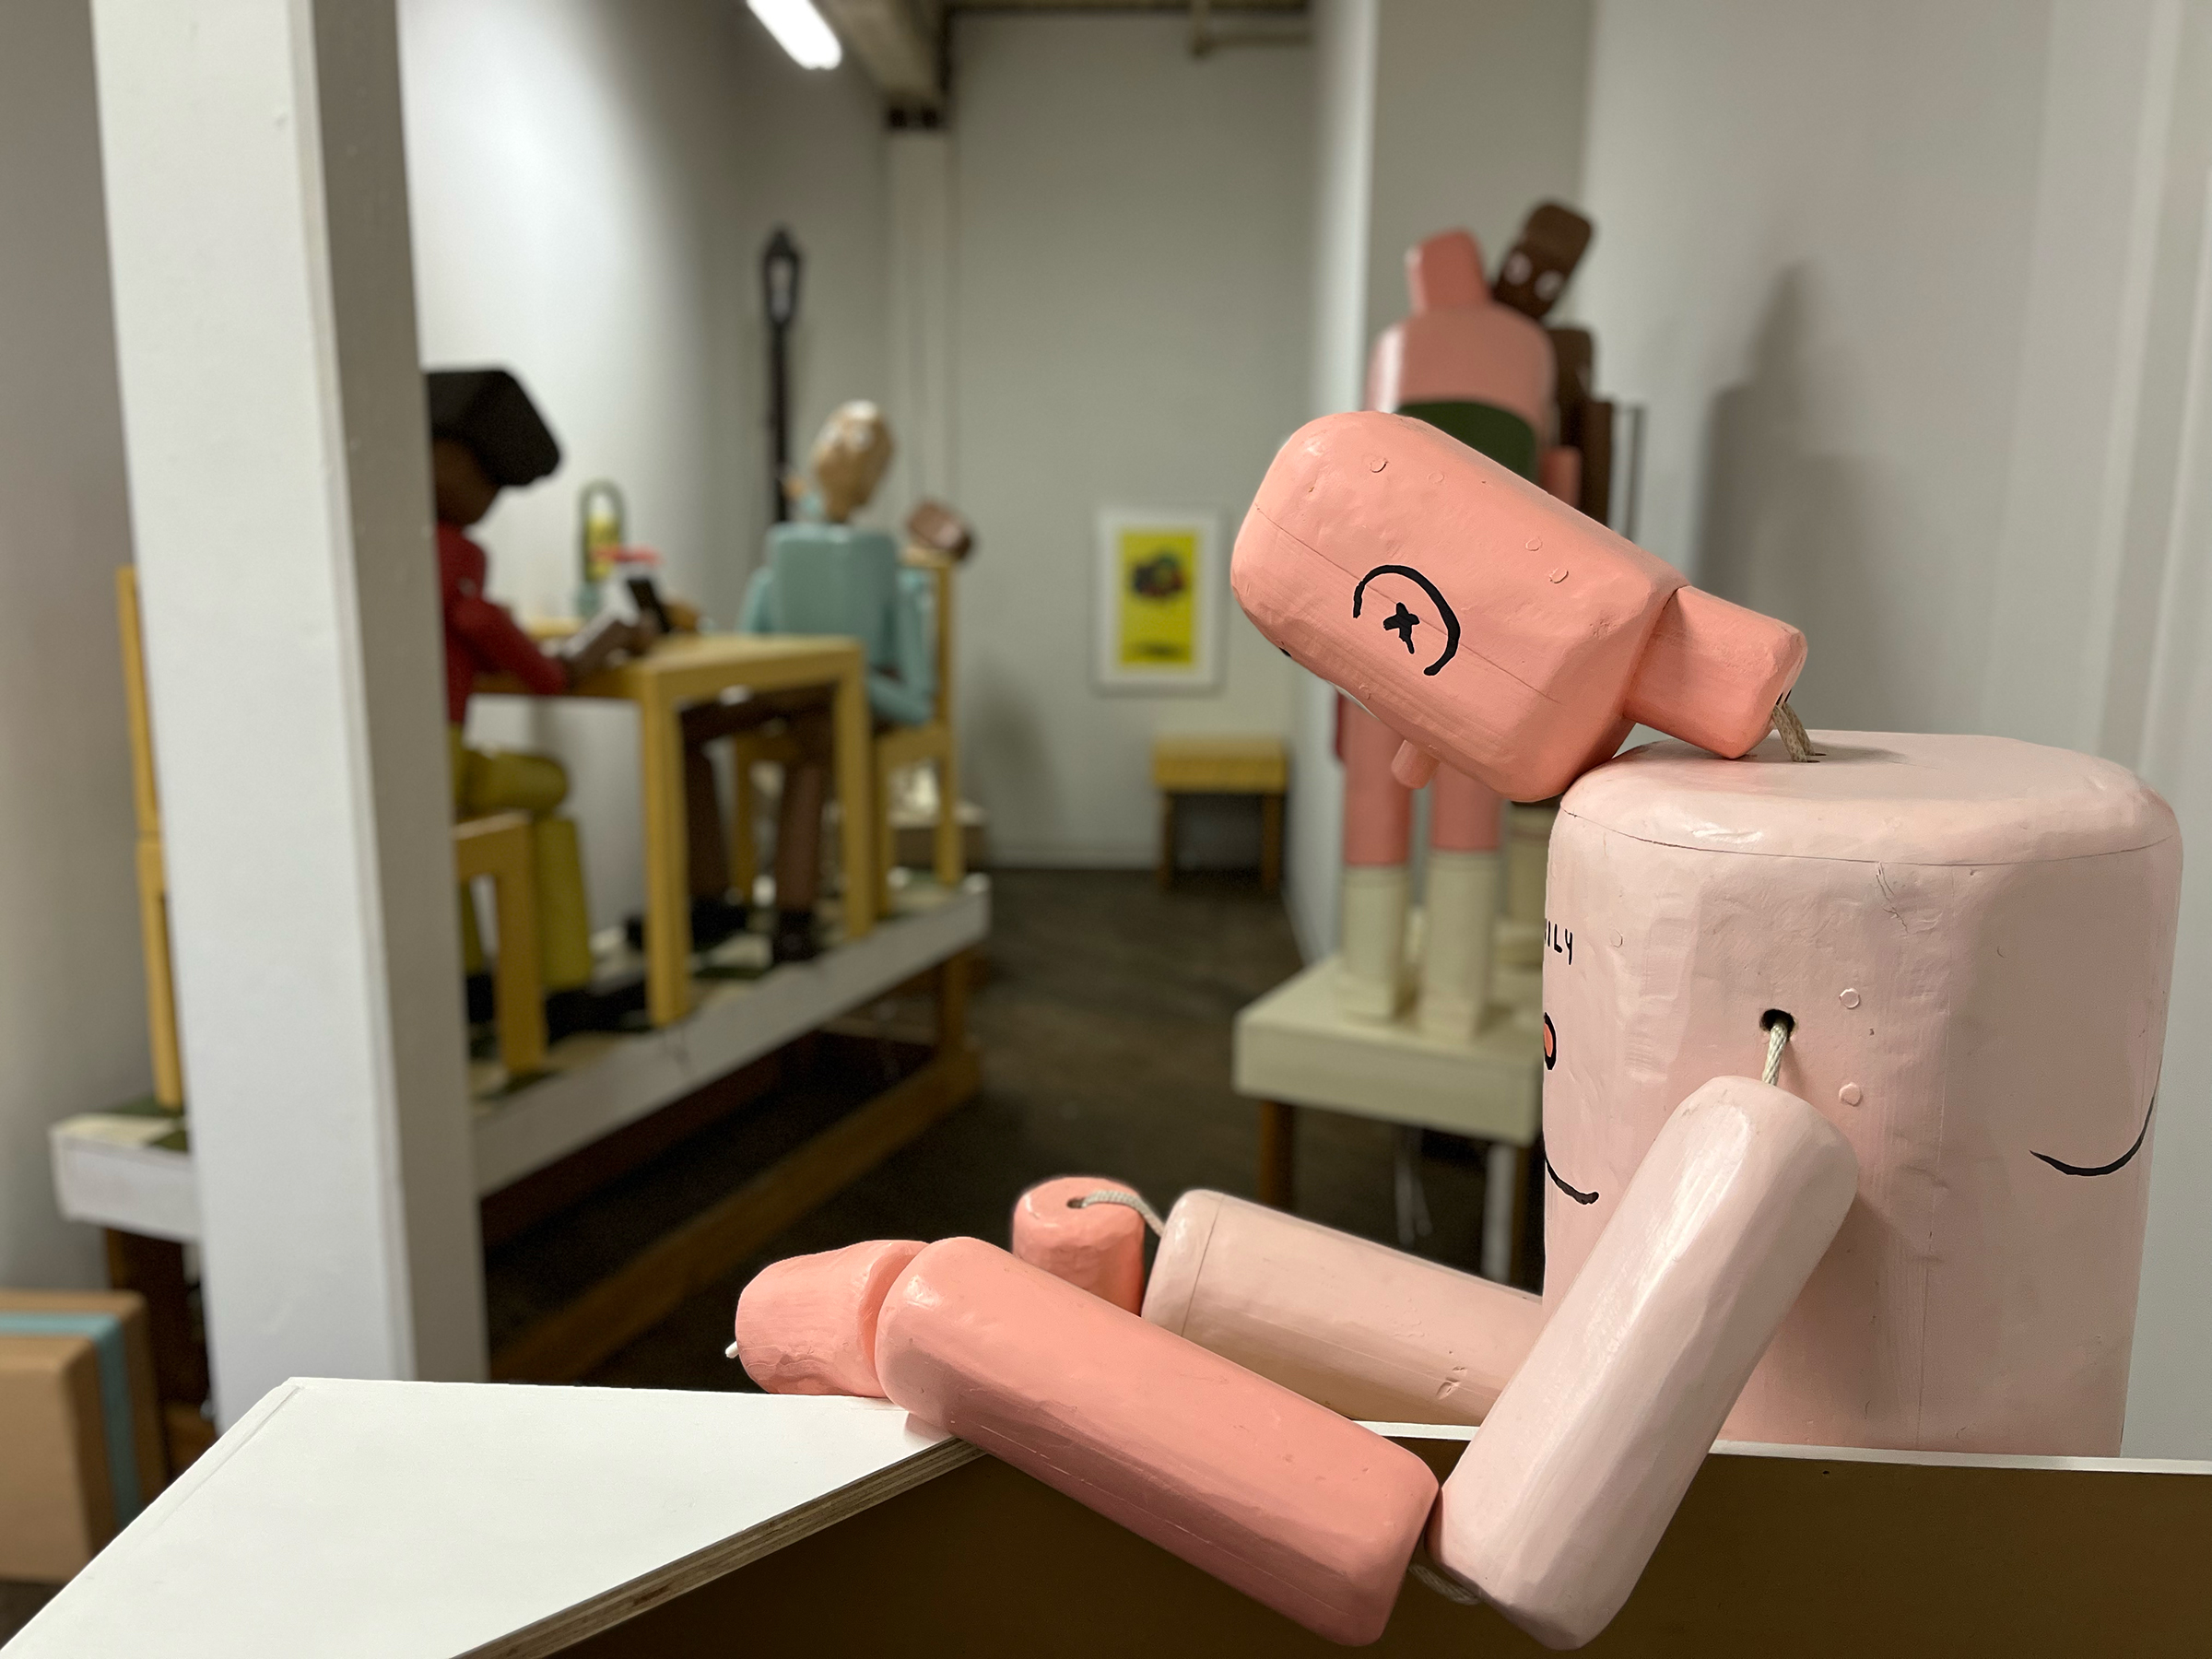 A photograph of a life-sized wooden sculpture of a man that resembles a push puppet toy in a gallery space with similar sculptures.